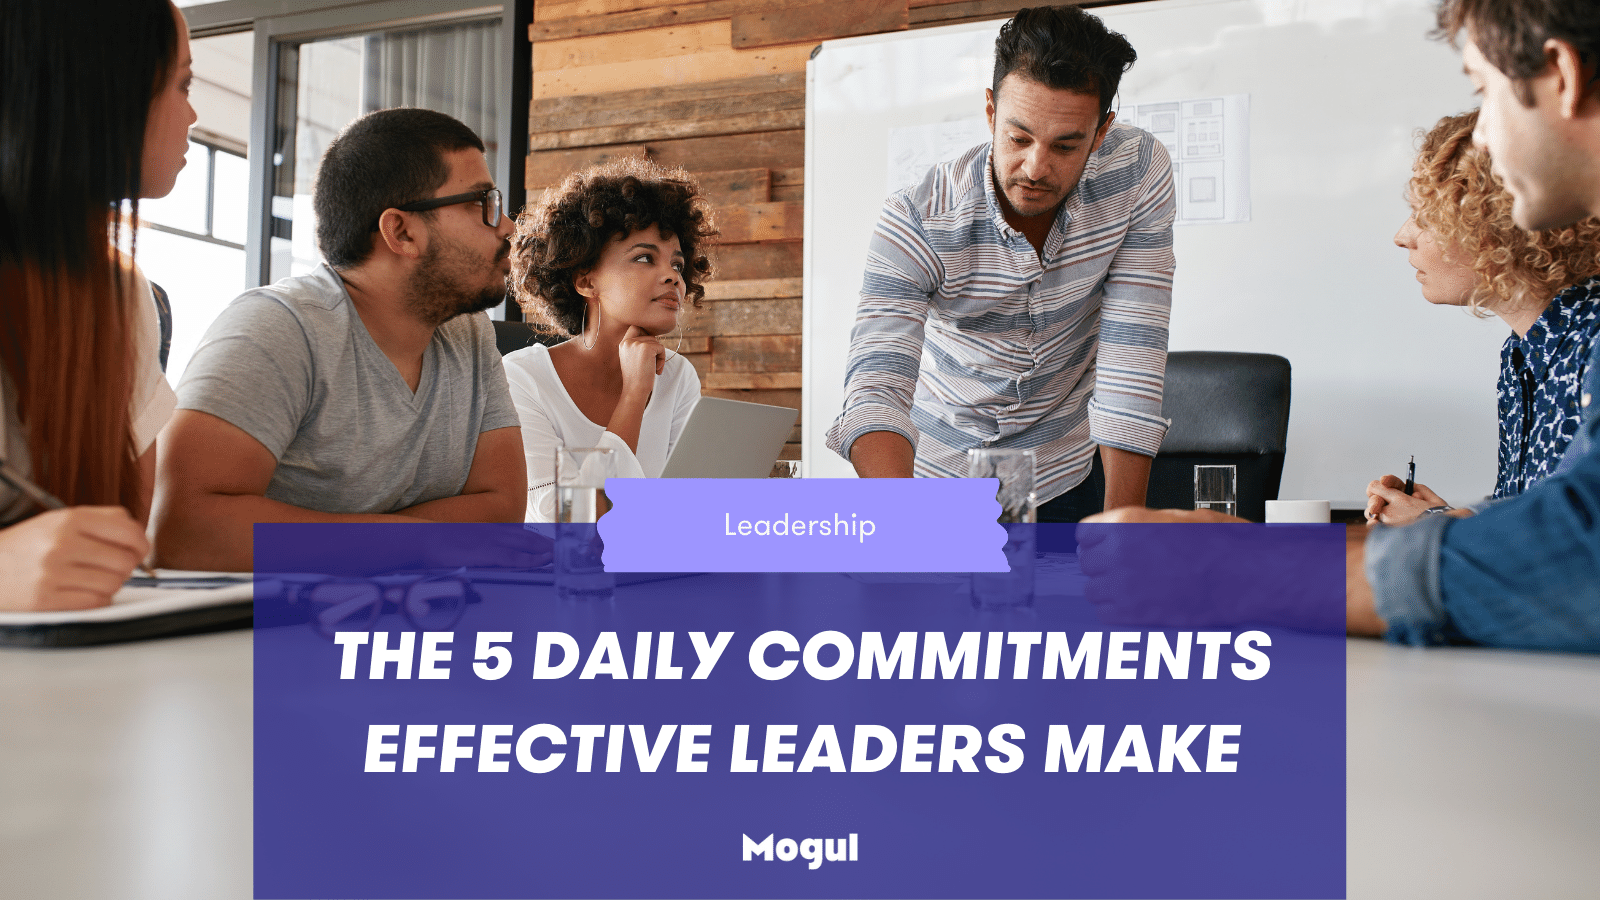 The 5 Daily Commitments Effective Leaders Make